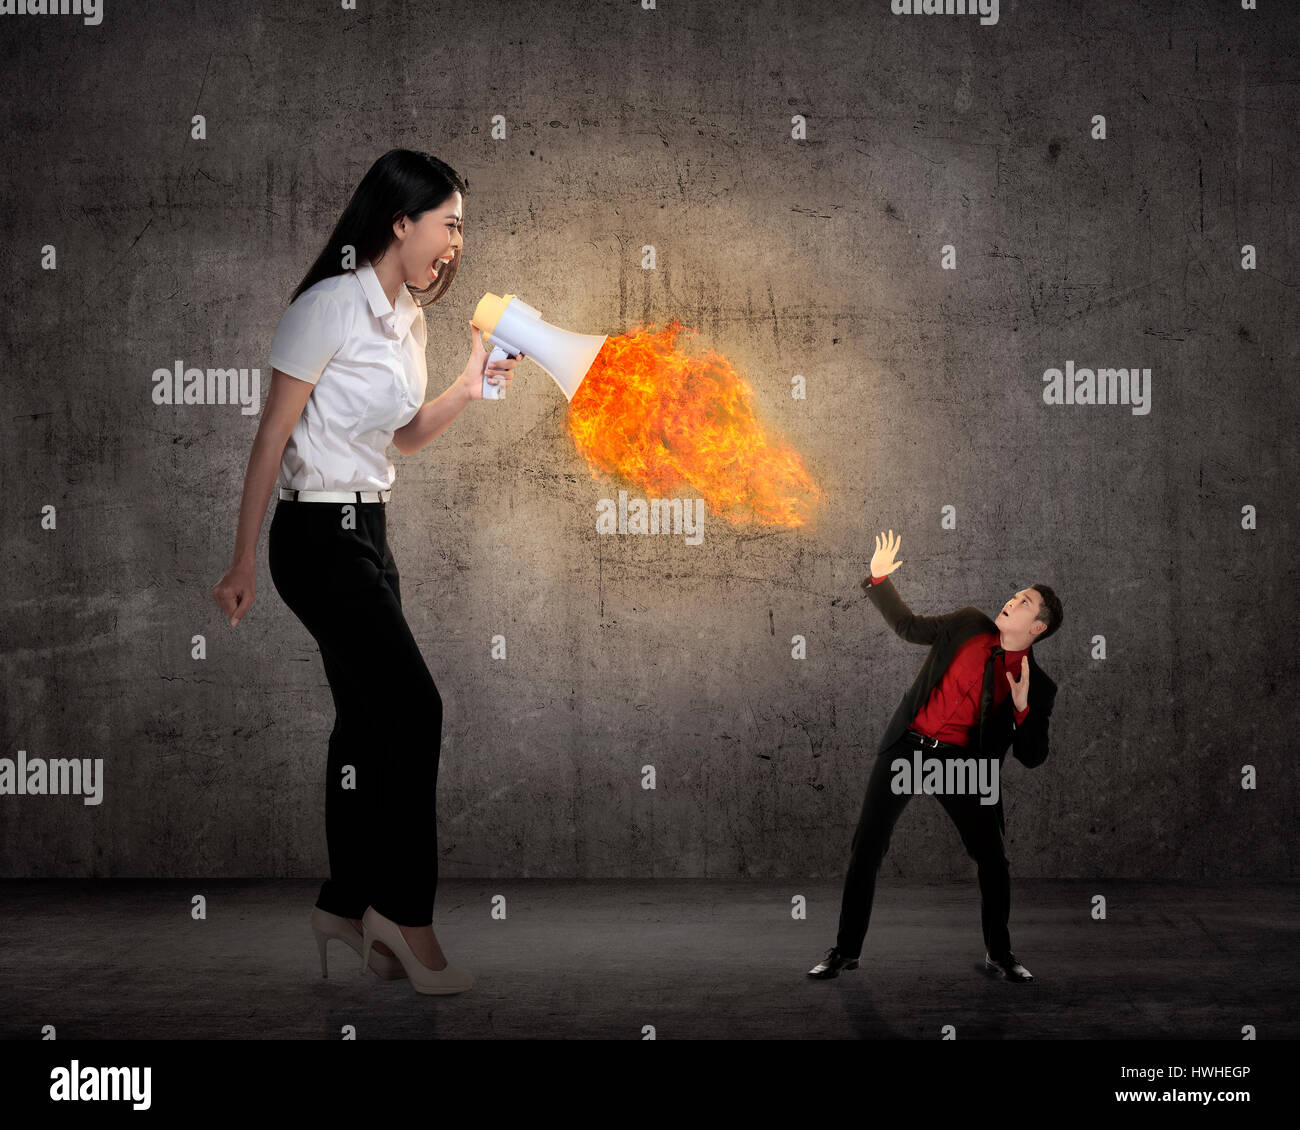 Big boss yelling to her employee with megaphone on fire. Work pressure concept Stock Photo